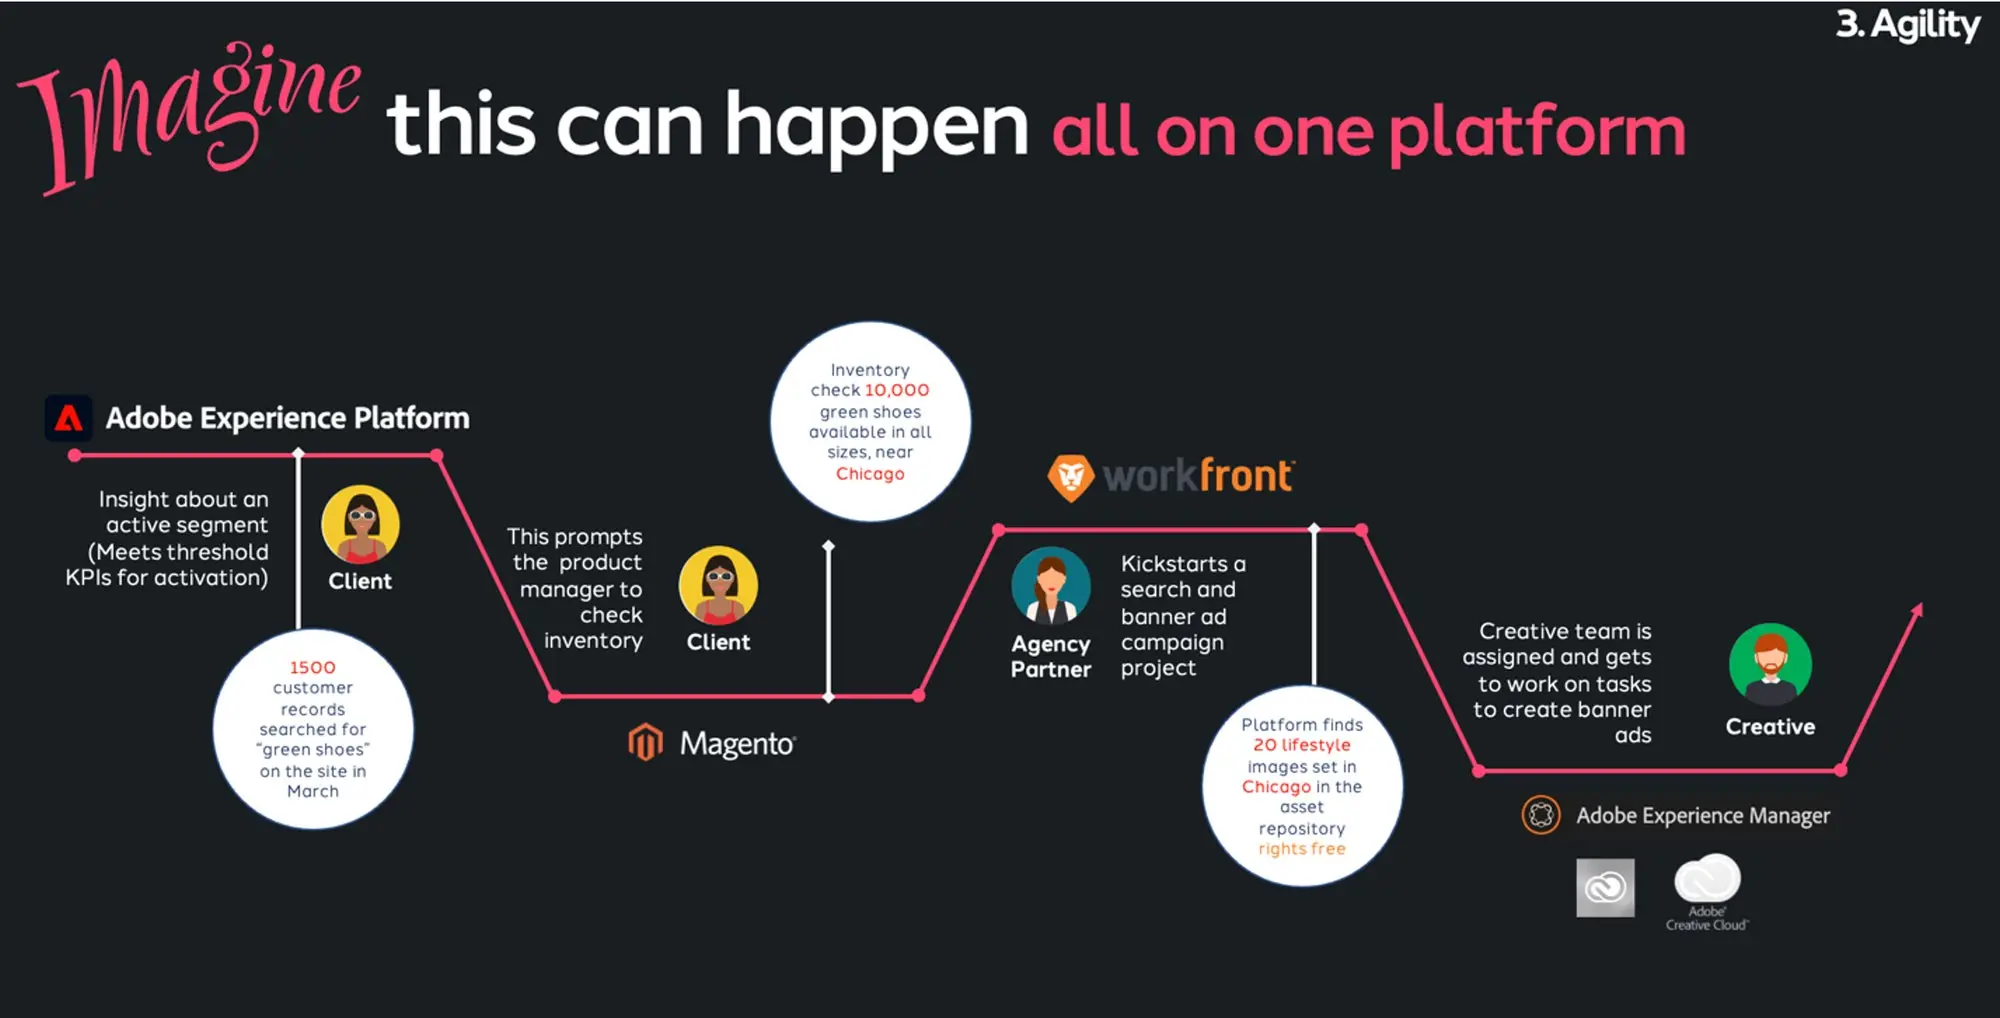 Infographic of the Adobe Workfront and dentsu integration.